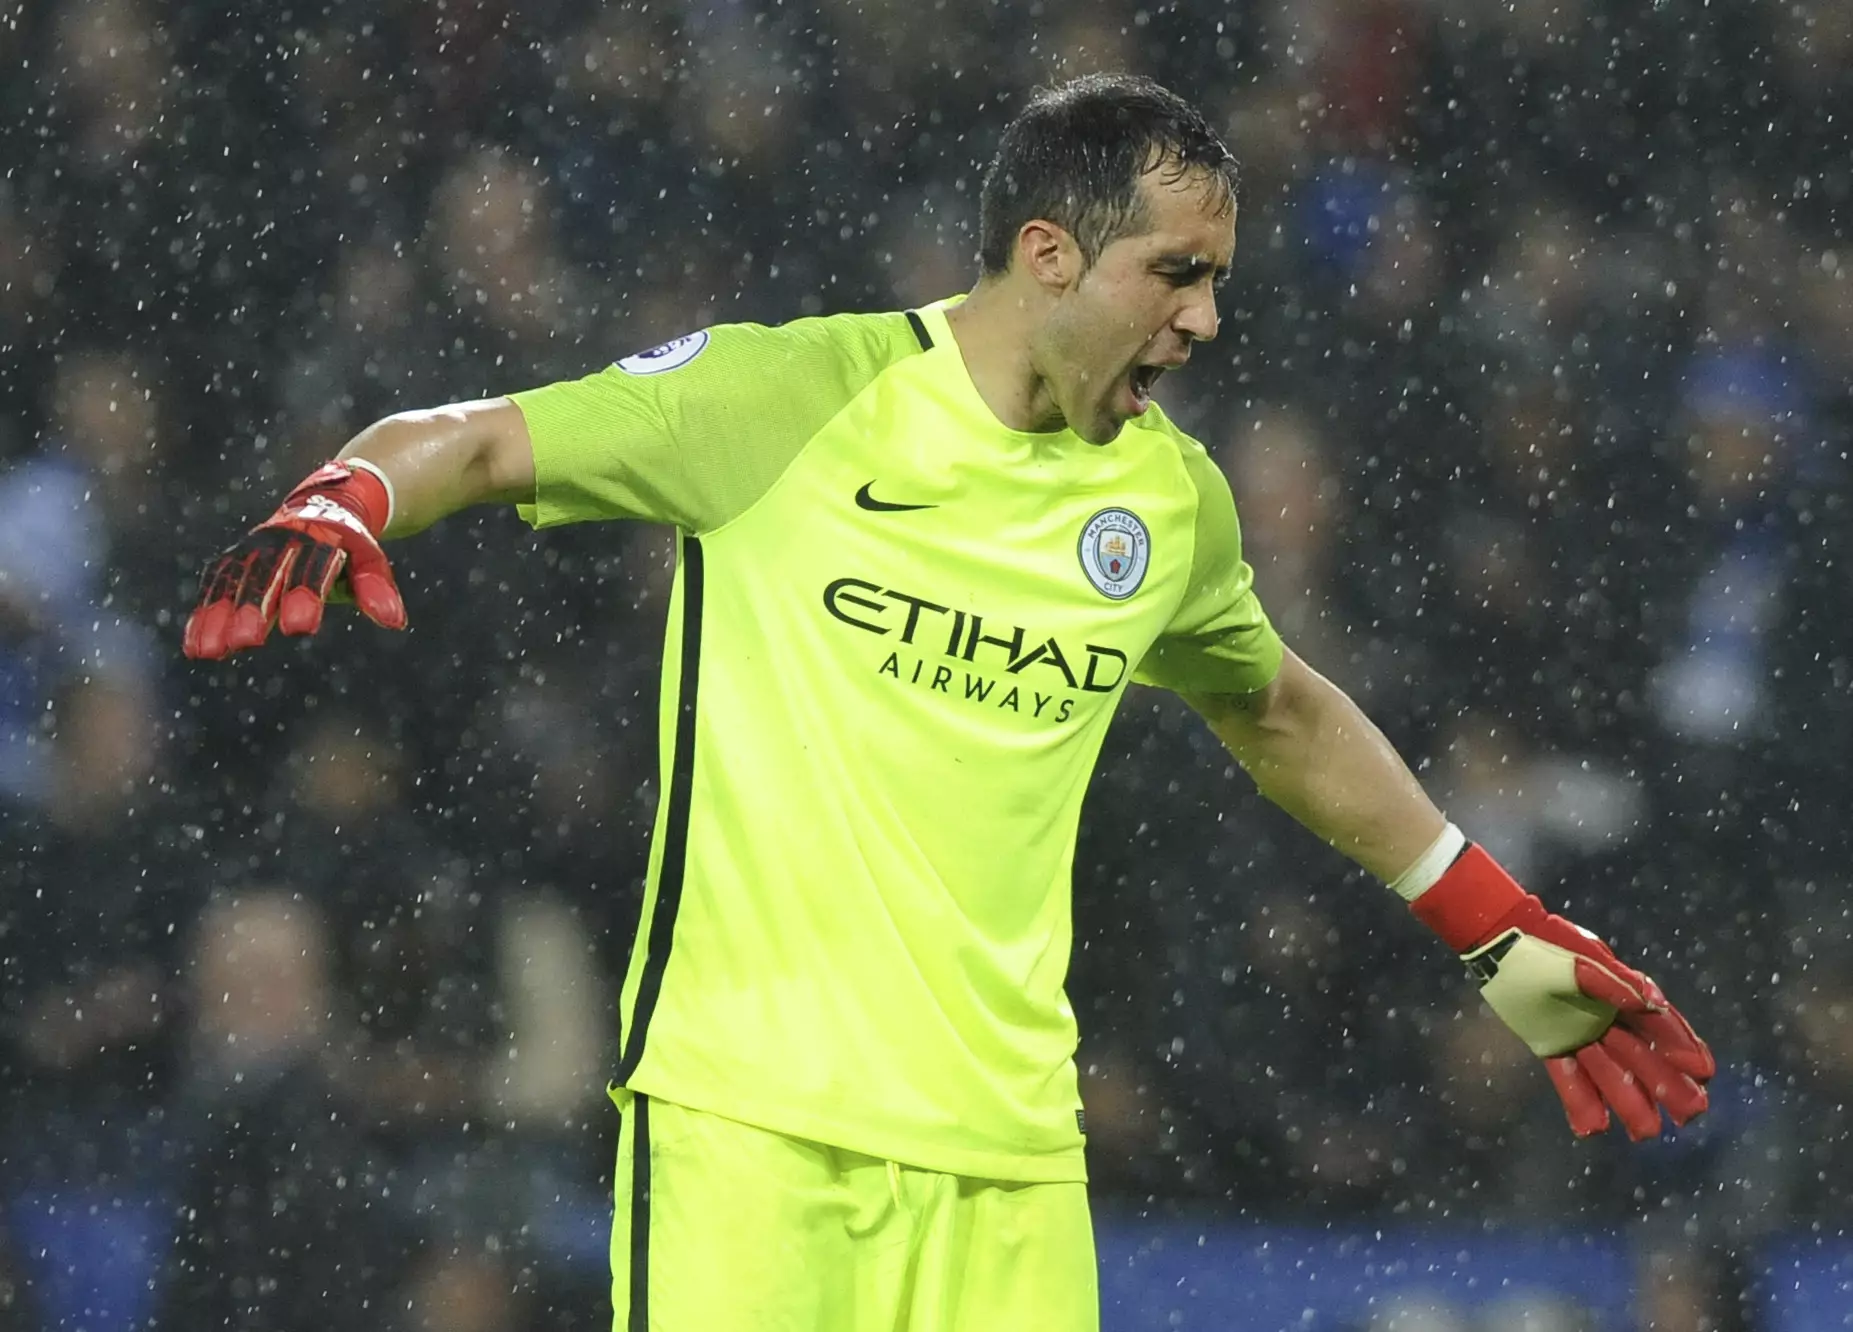 Manchester City Fans Are Not Happy With Claudio Bravo Being Programme Cover Star